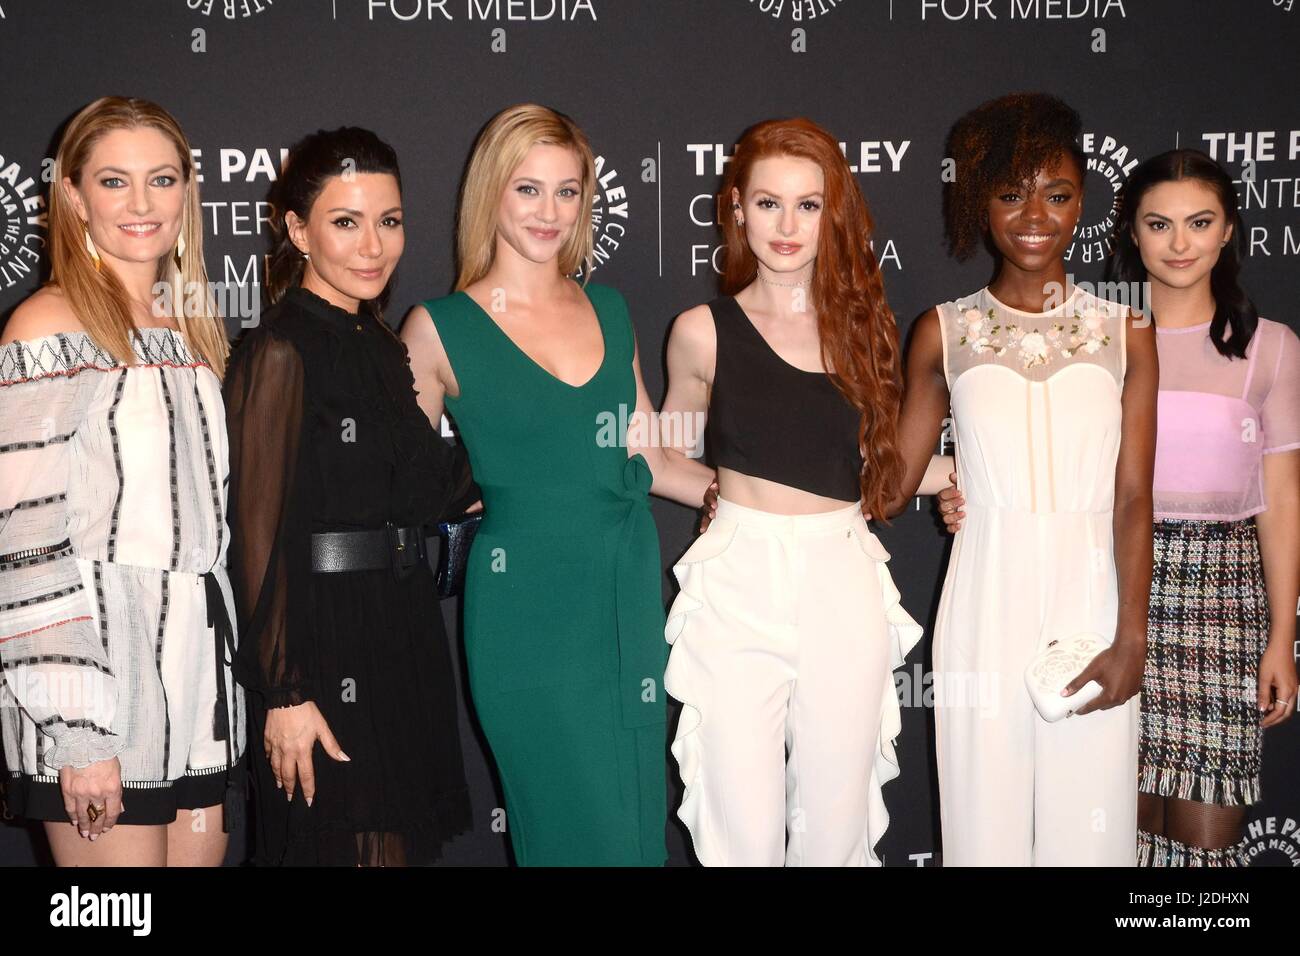 Beverly Hills, CA. 27th Apr, 2017. Madchen Amick, Marisol Nichols, Lili Reinhart, Madelaine Petsch, Ashleigh Murray, Camila Mendes at arrivals for The CW's RIVERDALE Screening and Conversation, The Paley Center for Media, Beverly Hills, CA April 27, 2017. Credit: Priscilla Grant/Everett Collection/Alamy Live News Stock Photo